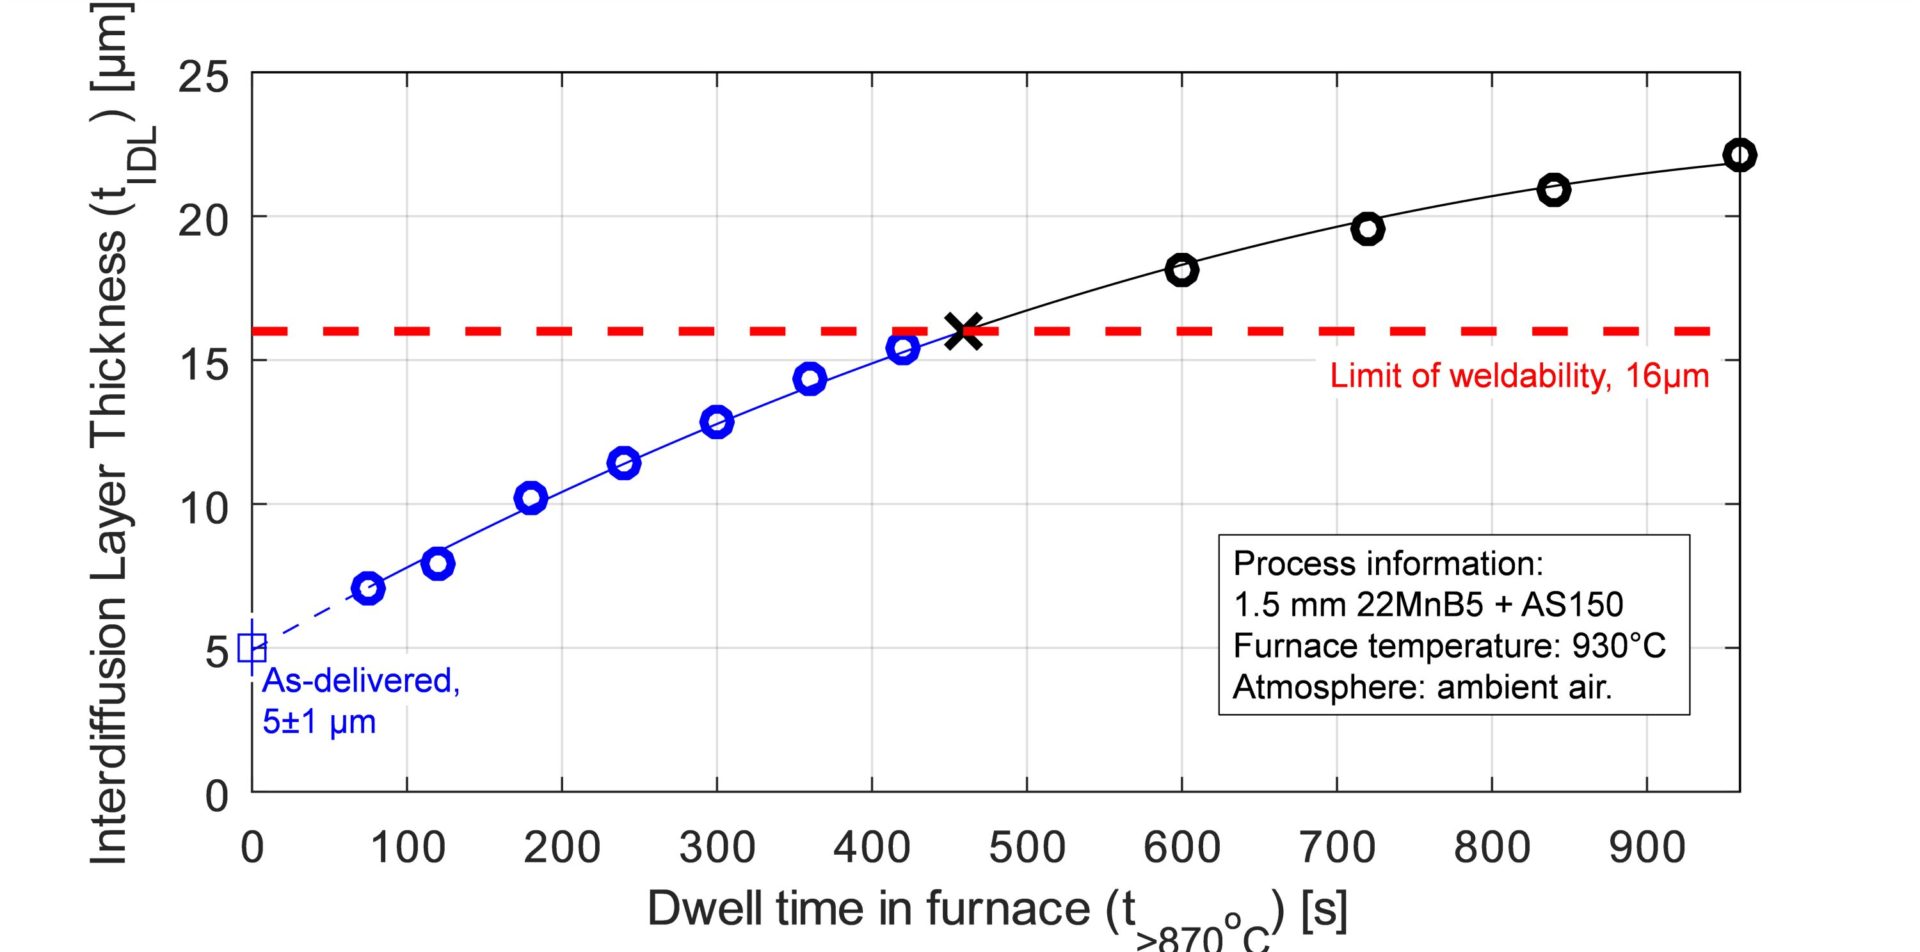 Figure 6: IDL thickness variation with furnace dwell time (Image created by REFERENCE 43 using raw data from REFERENCE 22, REFERENCE 26, and REFERENCE 27]